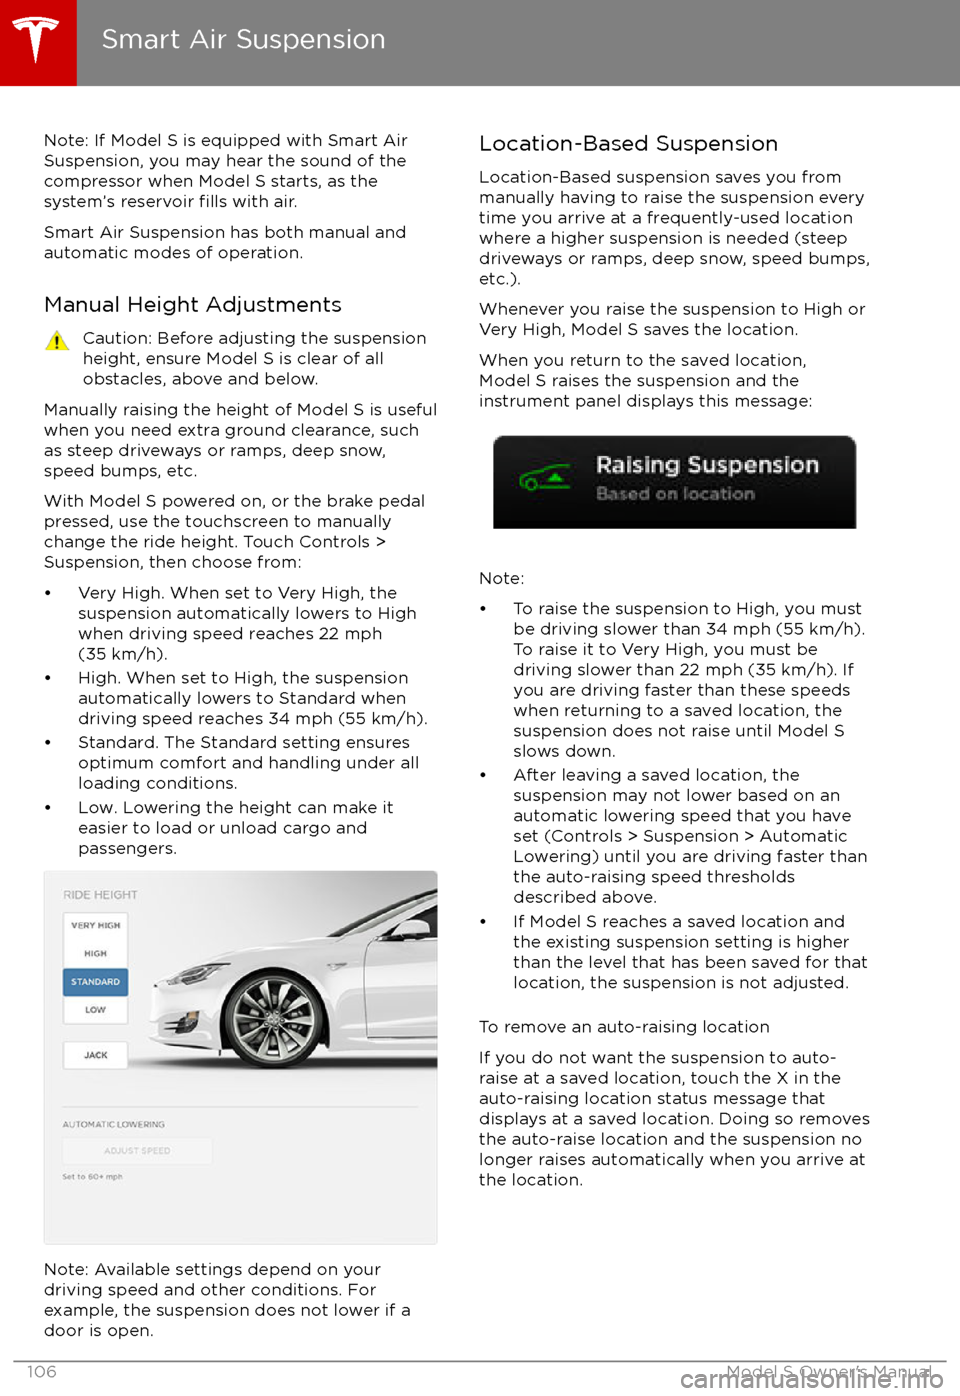 TESLA MODEL S 2017  Owners Manual Note: If Model S is equipped with Smart Air
Suspension, you may hear the sound of the
compressor when Model S starts, as the system